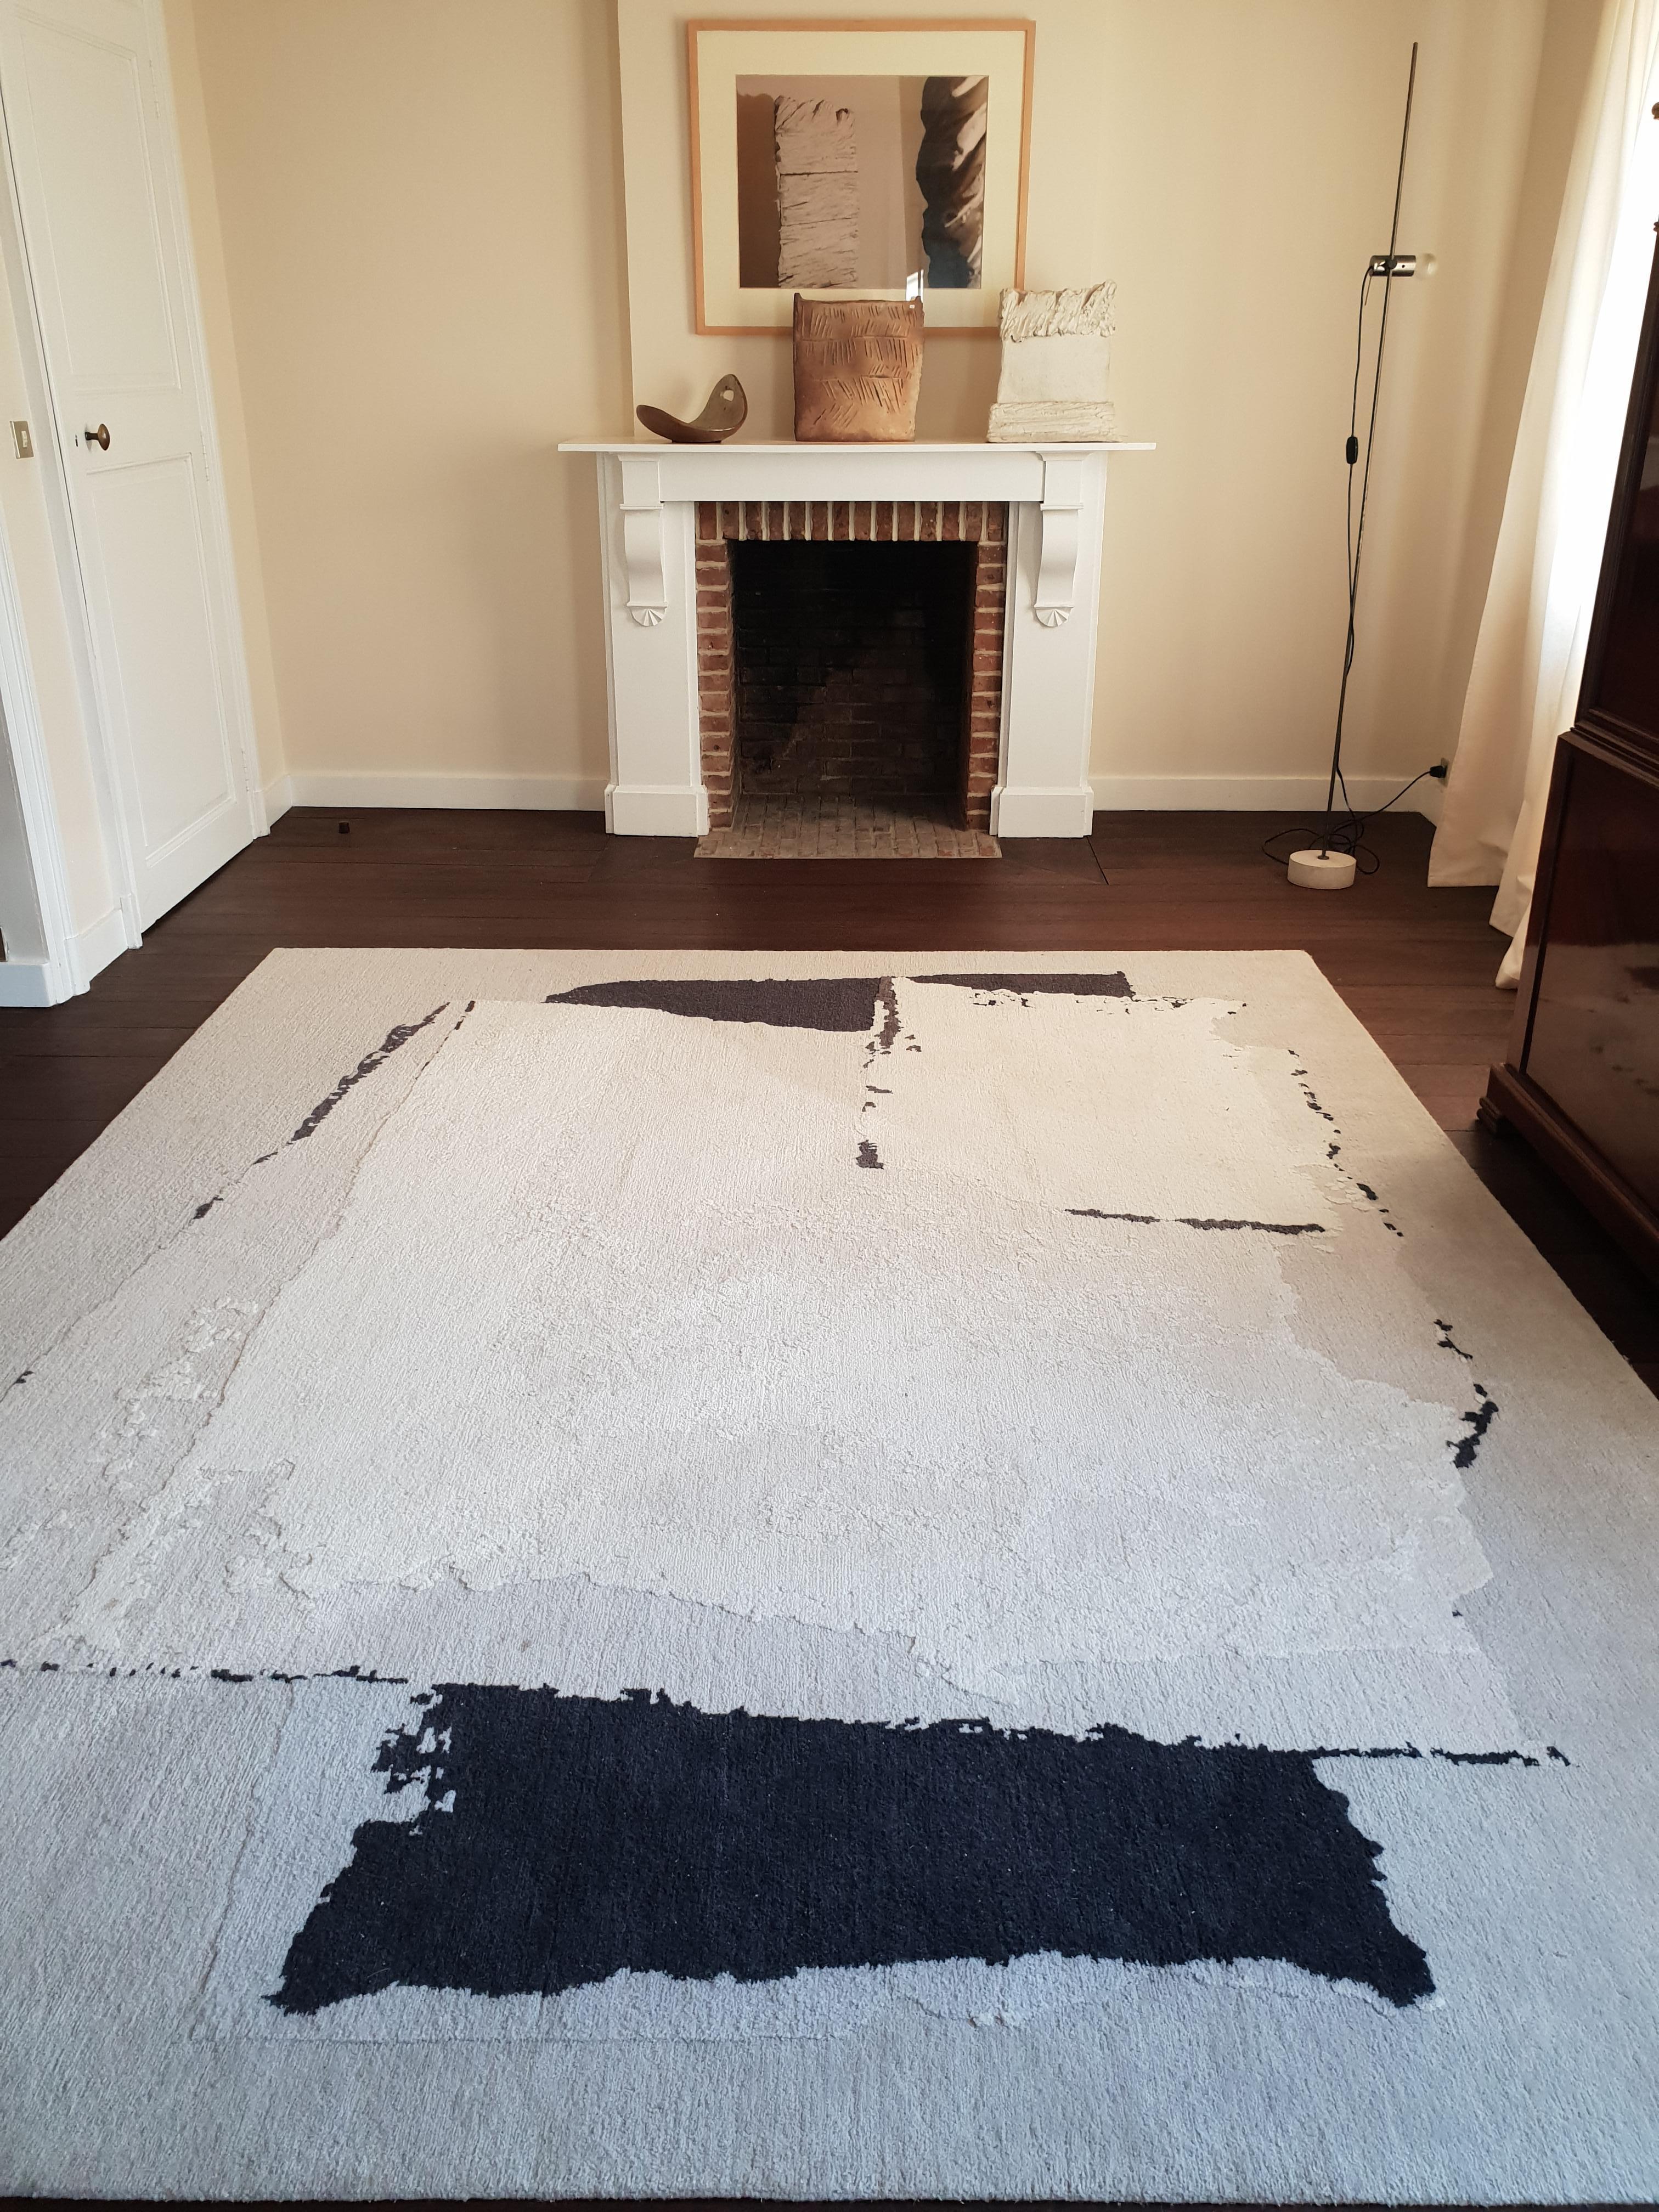 Rhizomes 3 hand knotted rug by Charlotte Culot
Edition: 8
Signed
Dimensions: 144 x 180 cm
Materials: Silk, wool, linen, allo
Hand knotted.

During a visit to Château La Coste in 2018 Charlotte Culot was inspired by a strikingly modern woven